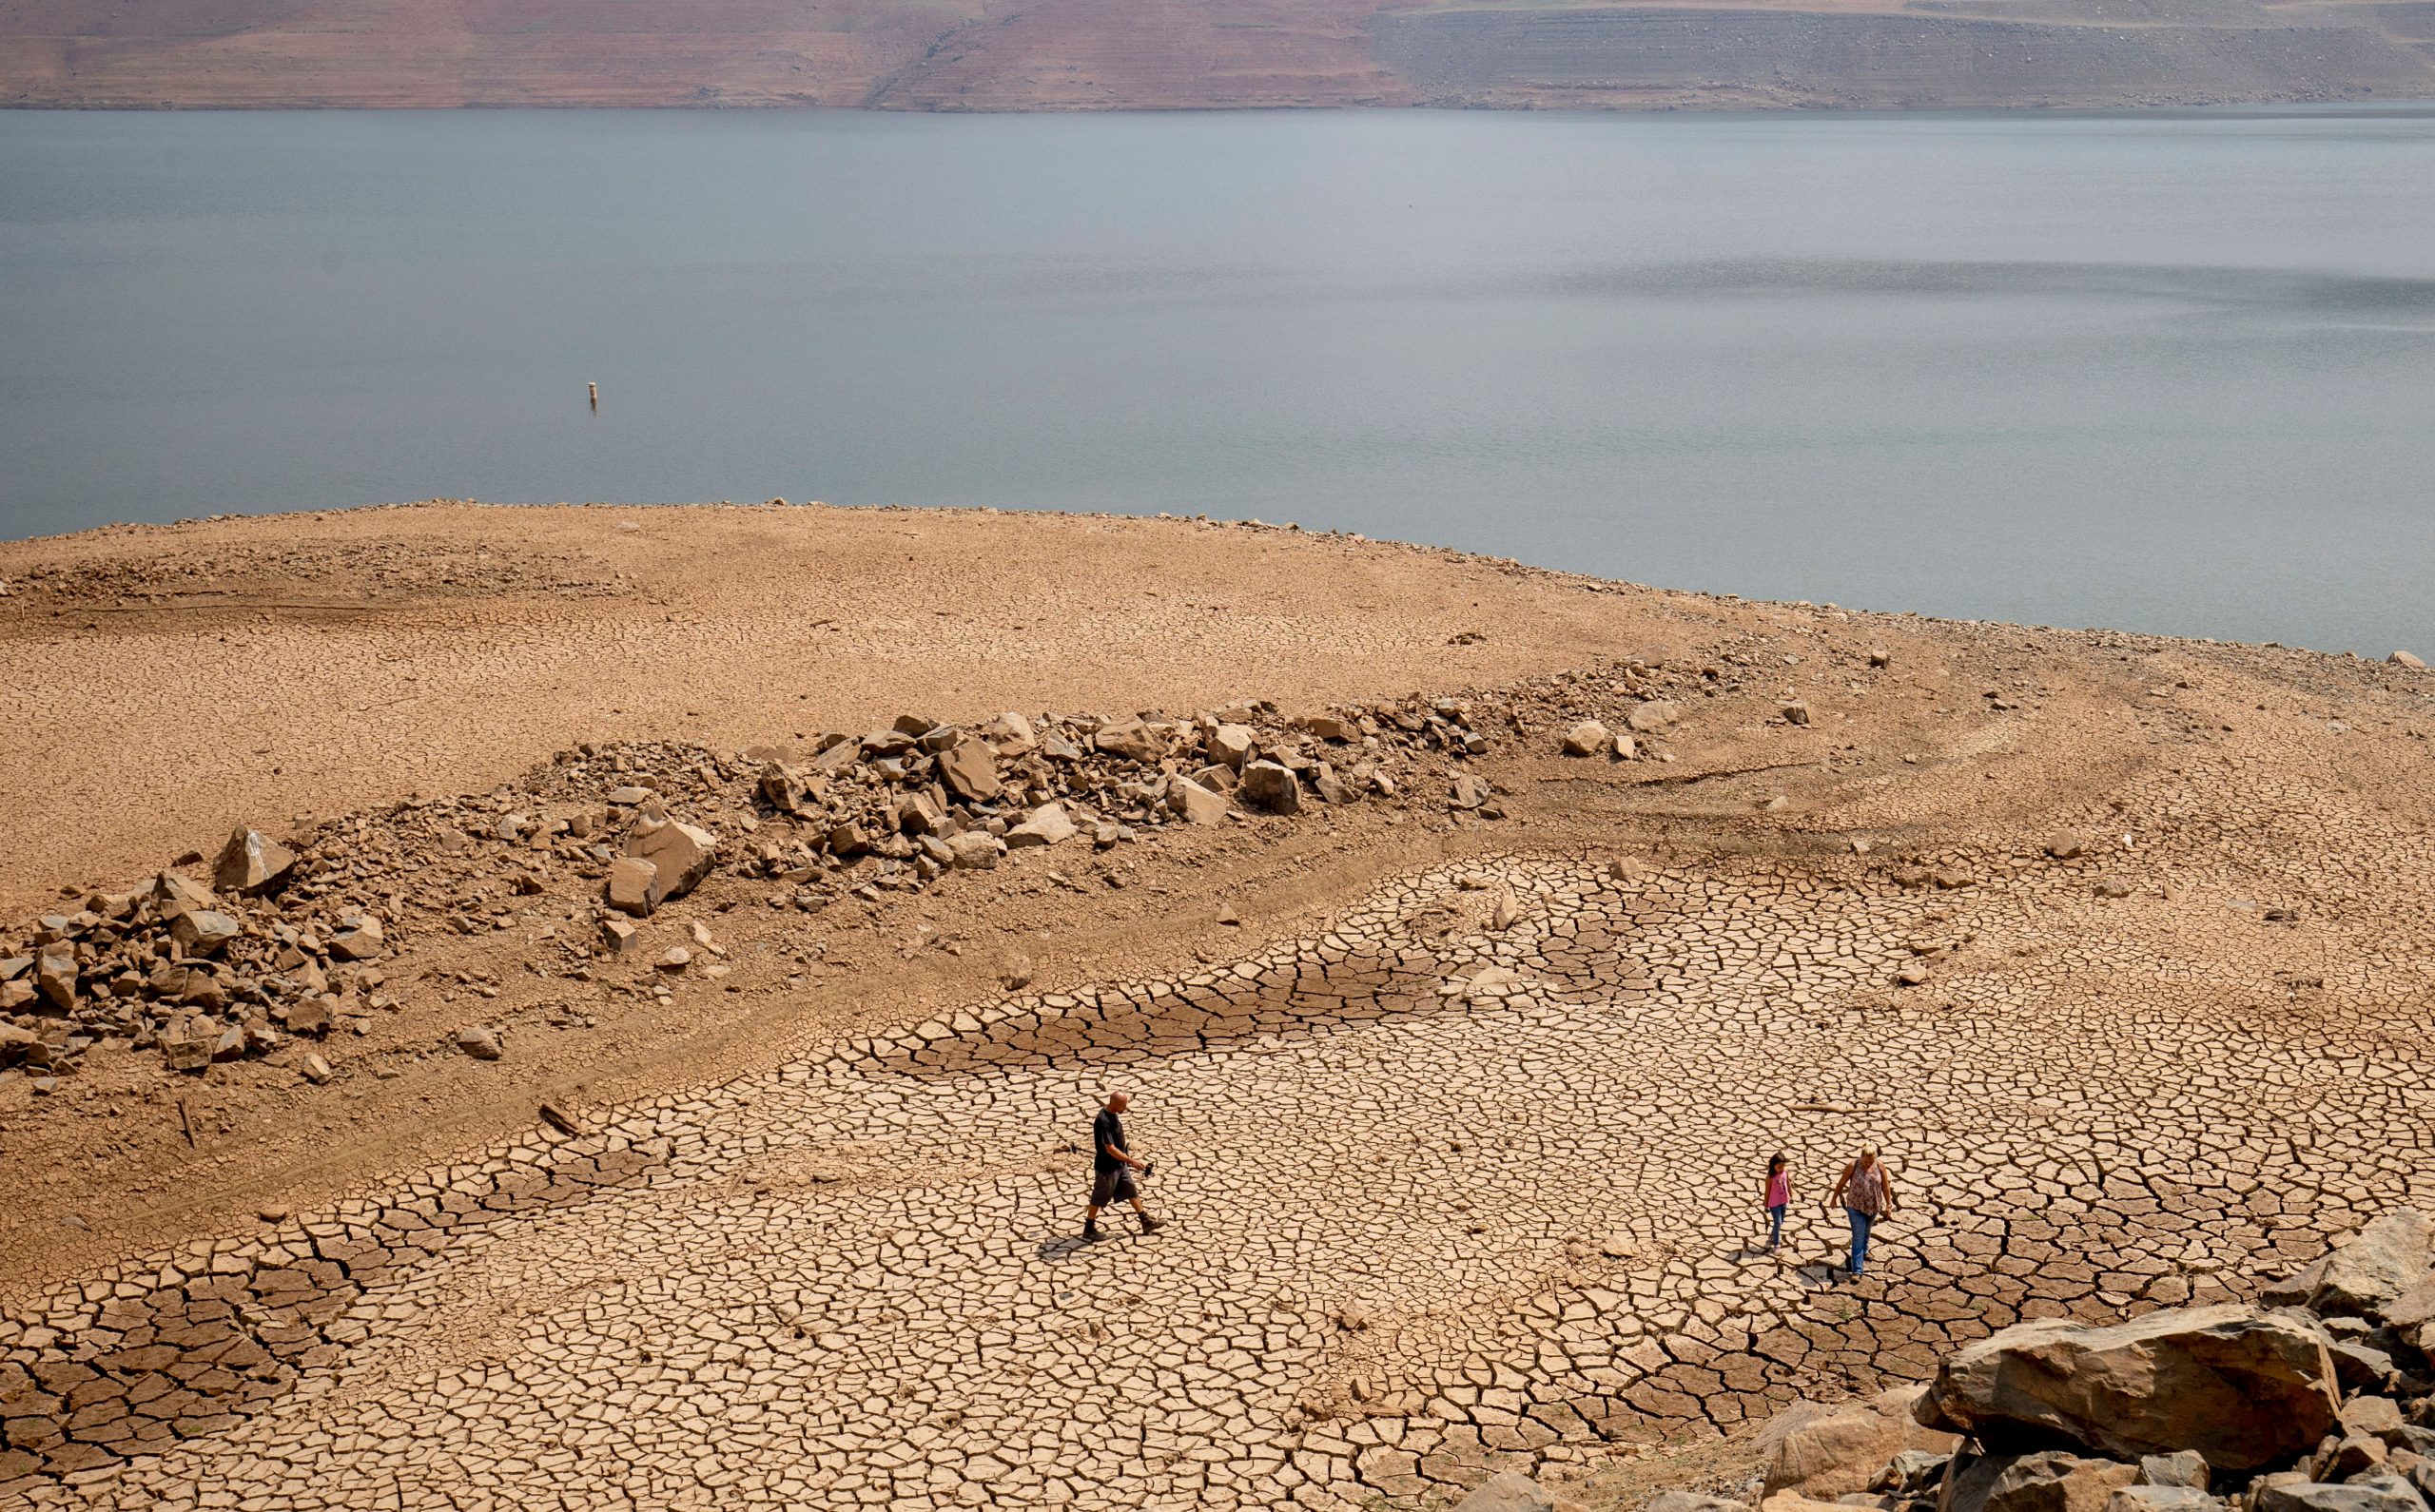 Driest January in a century: A parched year awaits California